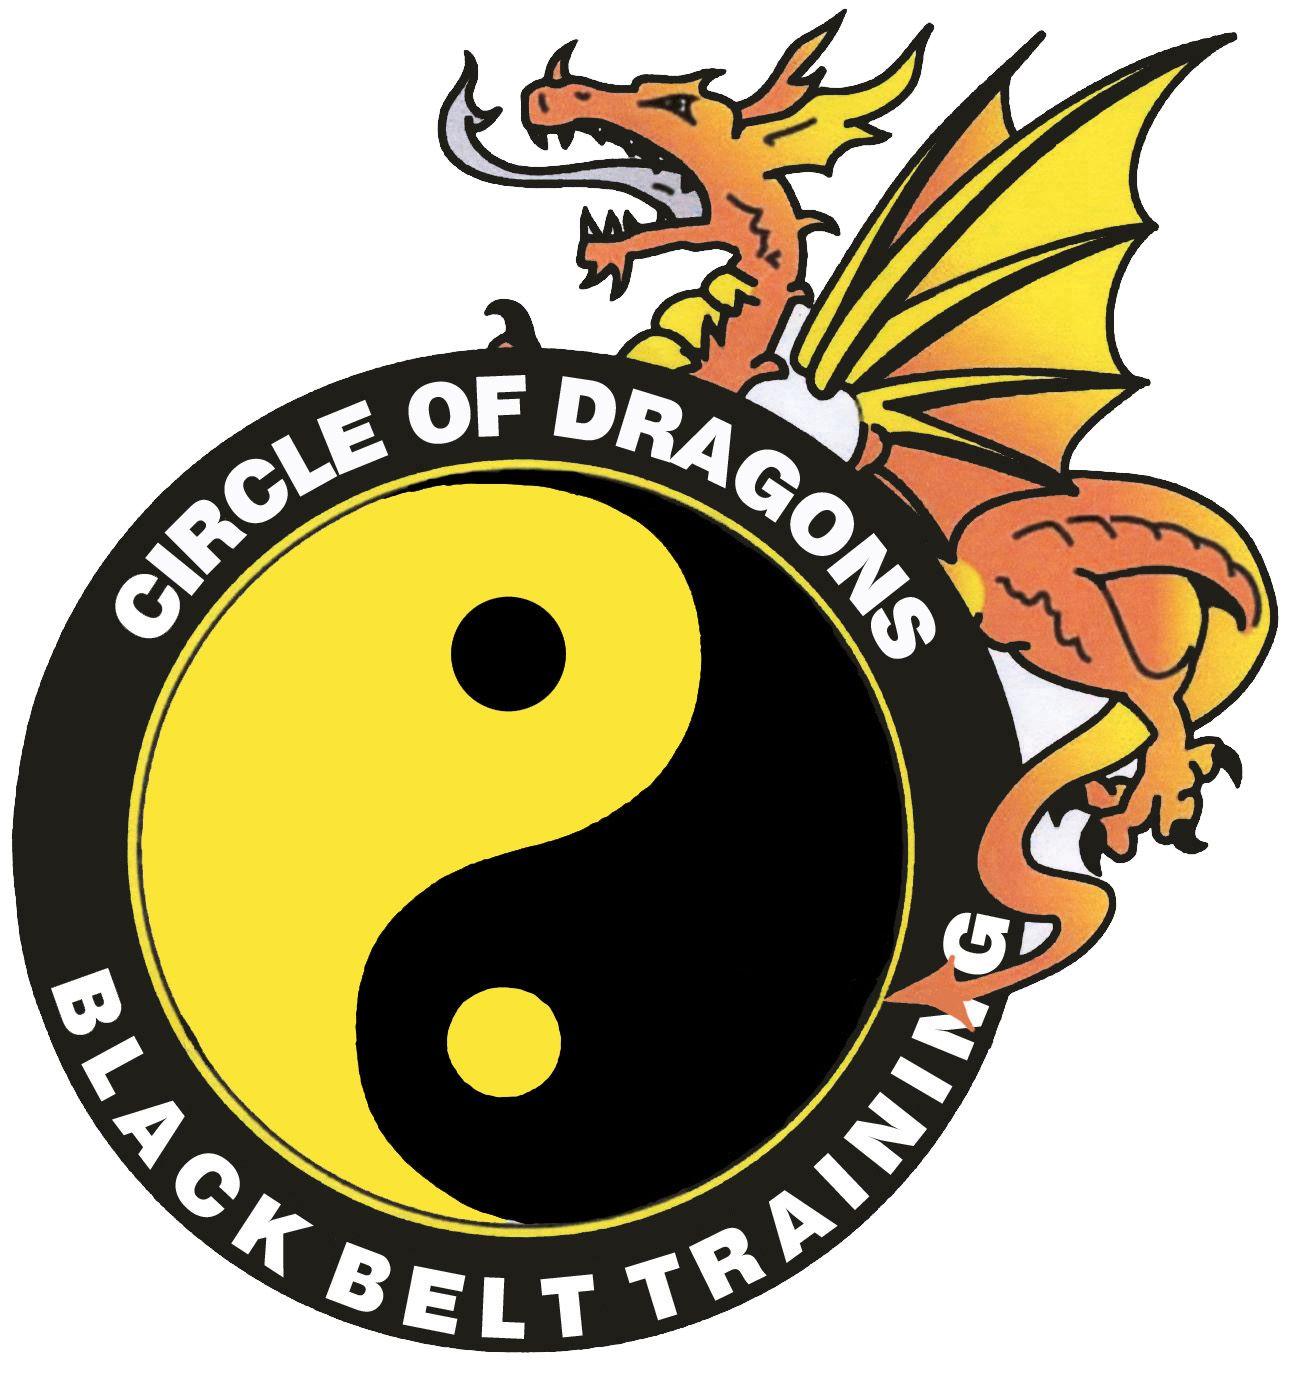 Yellow and Black Dragon Logo - Pictures of Black Dragon Logo In Circle - www.kidskunst.info